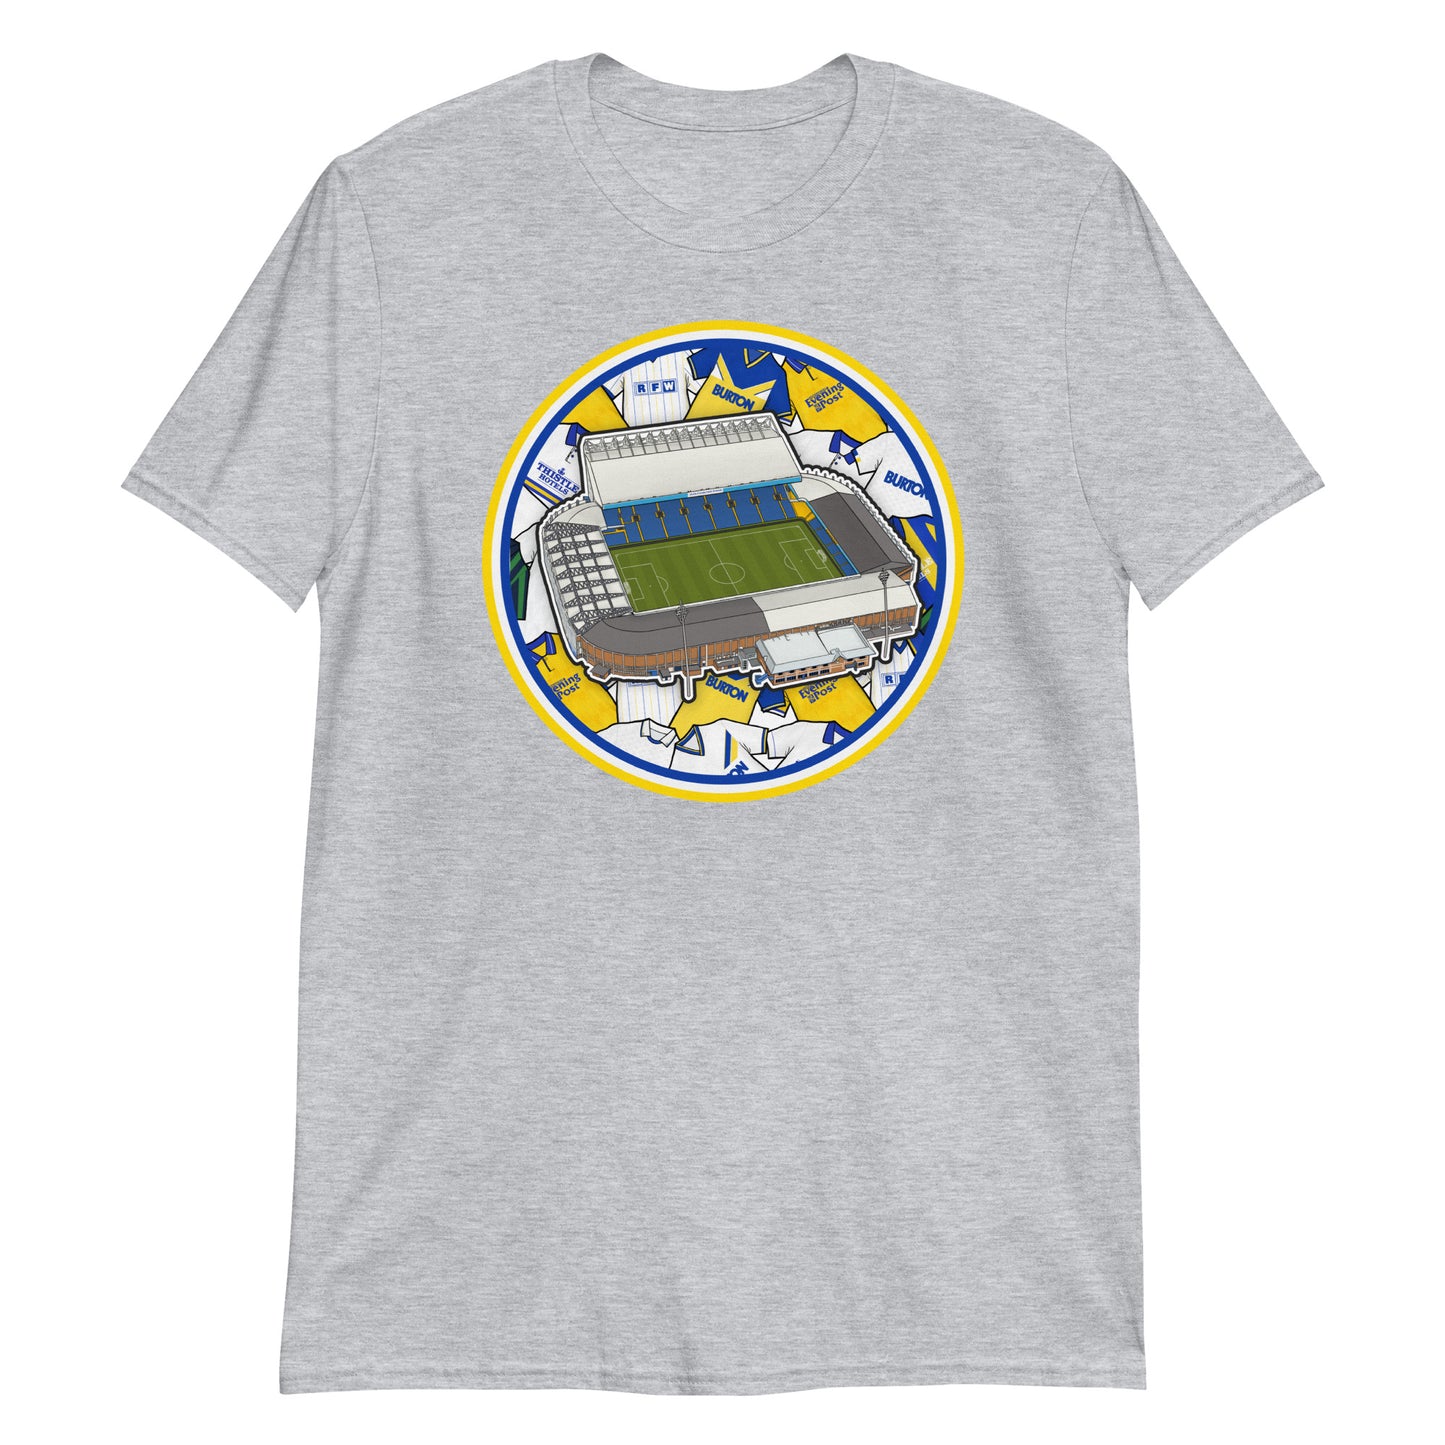 Light Grey Retro themed Leeds United inspired T-shirt featuring the iconic Elland Road Stadium & historic jerseys in the background